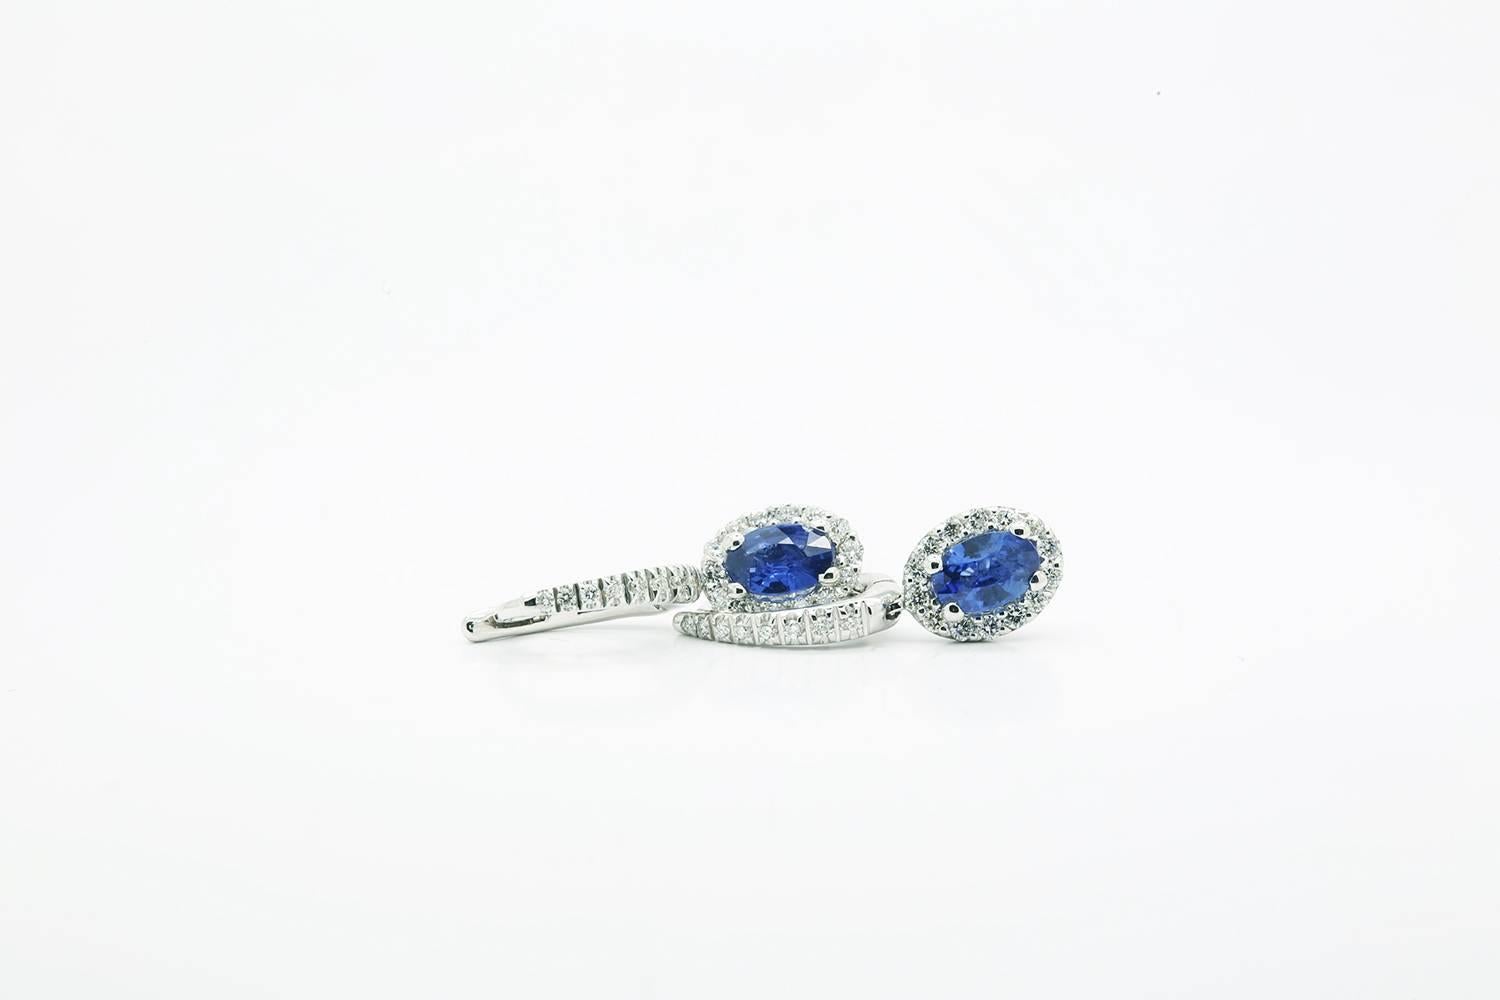 Blue Sapphires dangling earrings in 18k white gold by FERRUCCI & CO. with bright white diamonds, fine and elegant, Made in Italy

Diamonds total carat weight 0.46 ct

Blues Sapphires carat weight 1.10 ct

 